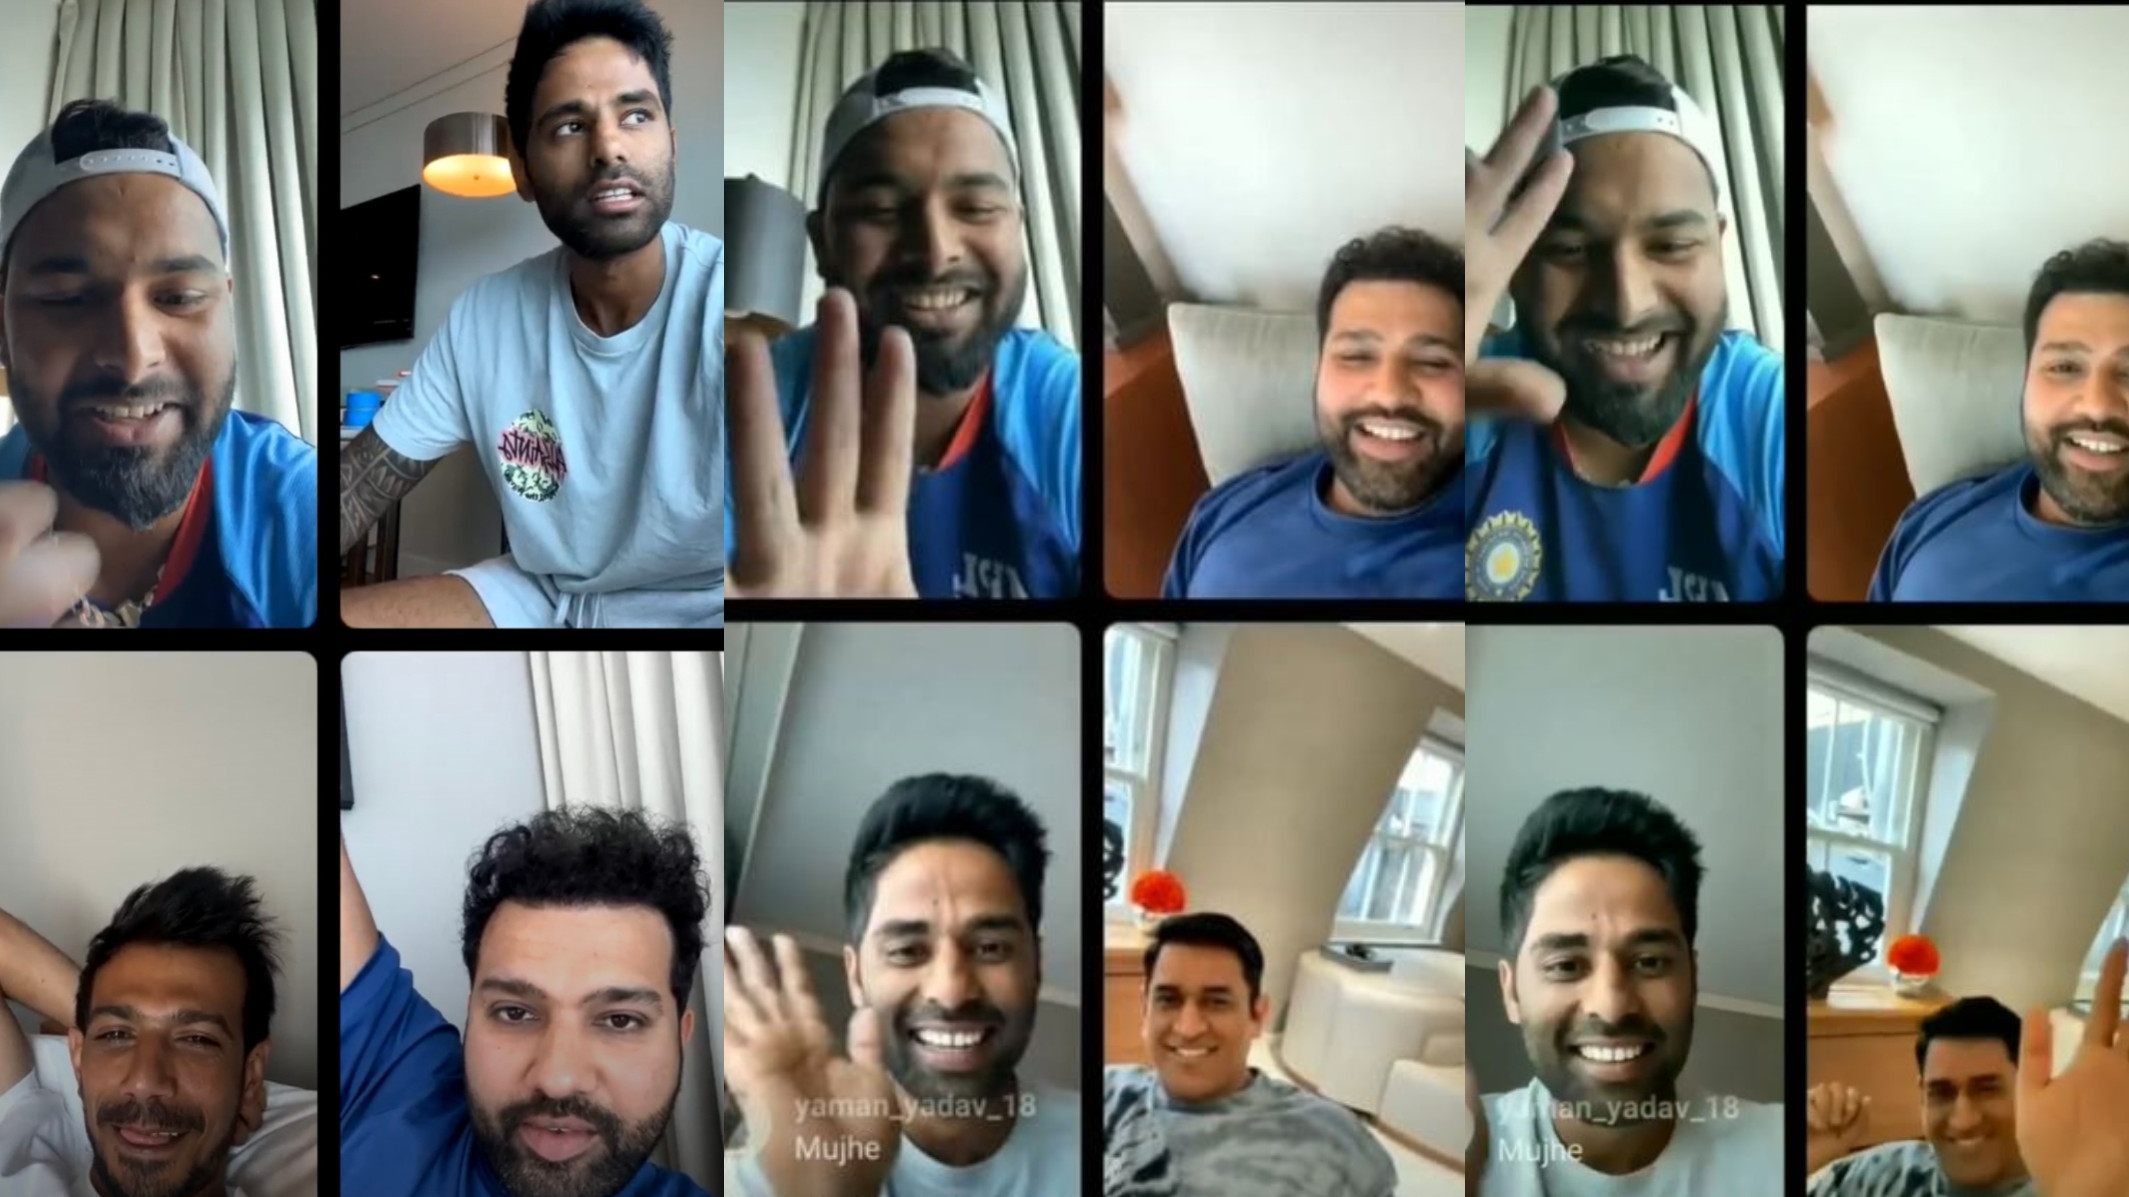 WATCH- MS Dhoni's cameo appearance on Rishabh Pant’s Insta live featuring Rohit, Suryakumar, and Chahal